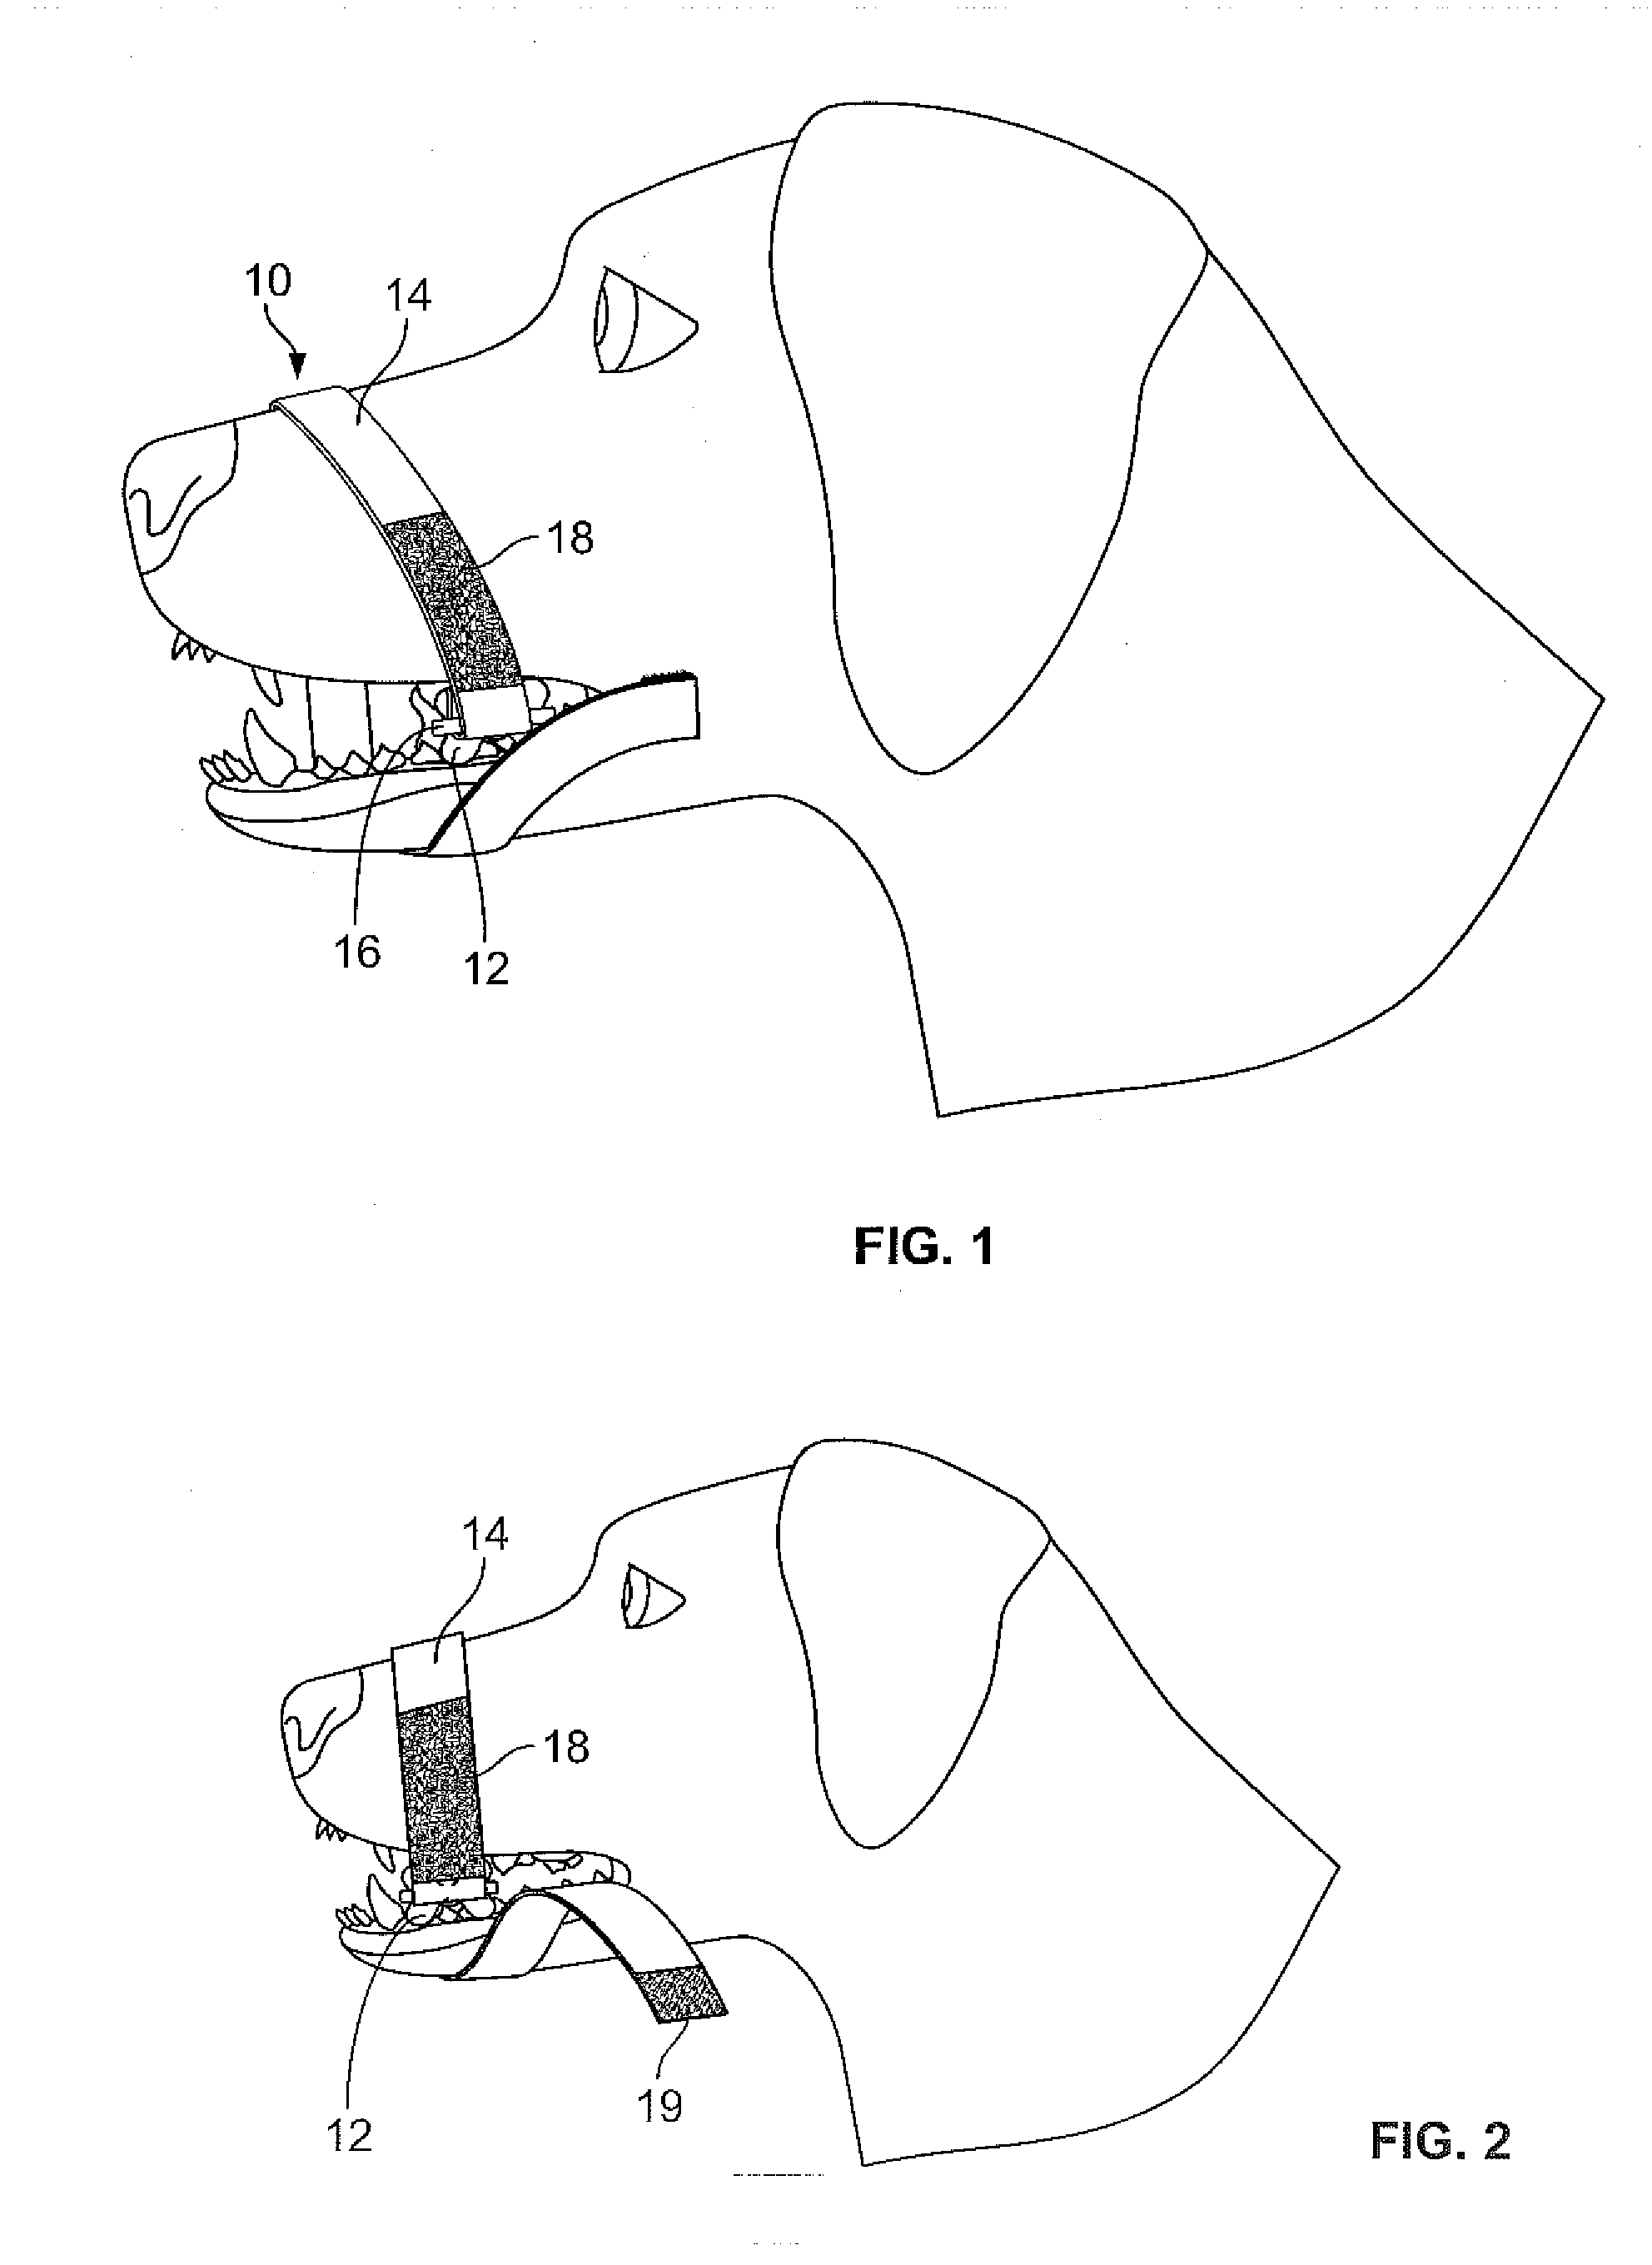 Apparatus for holding open the mouth of an animal with its jaws in a fixed relationship for performing a medical or dental procedure